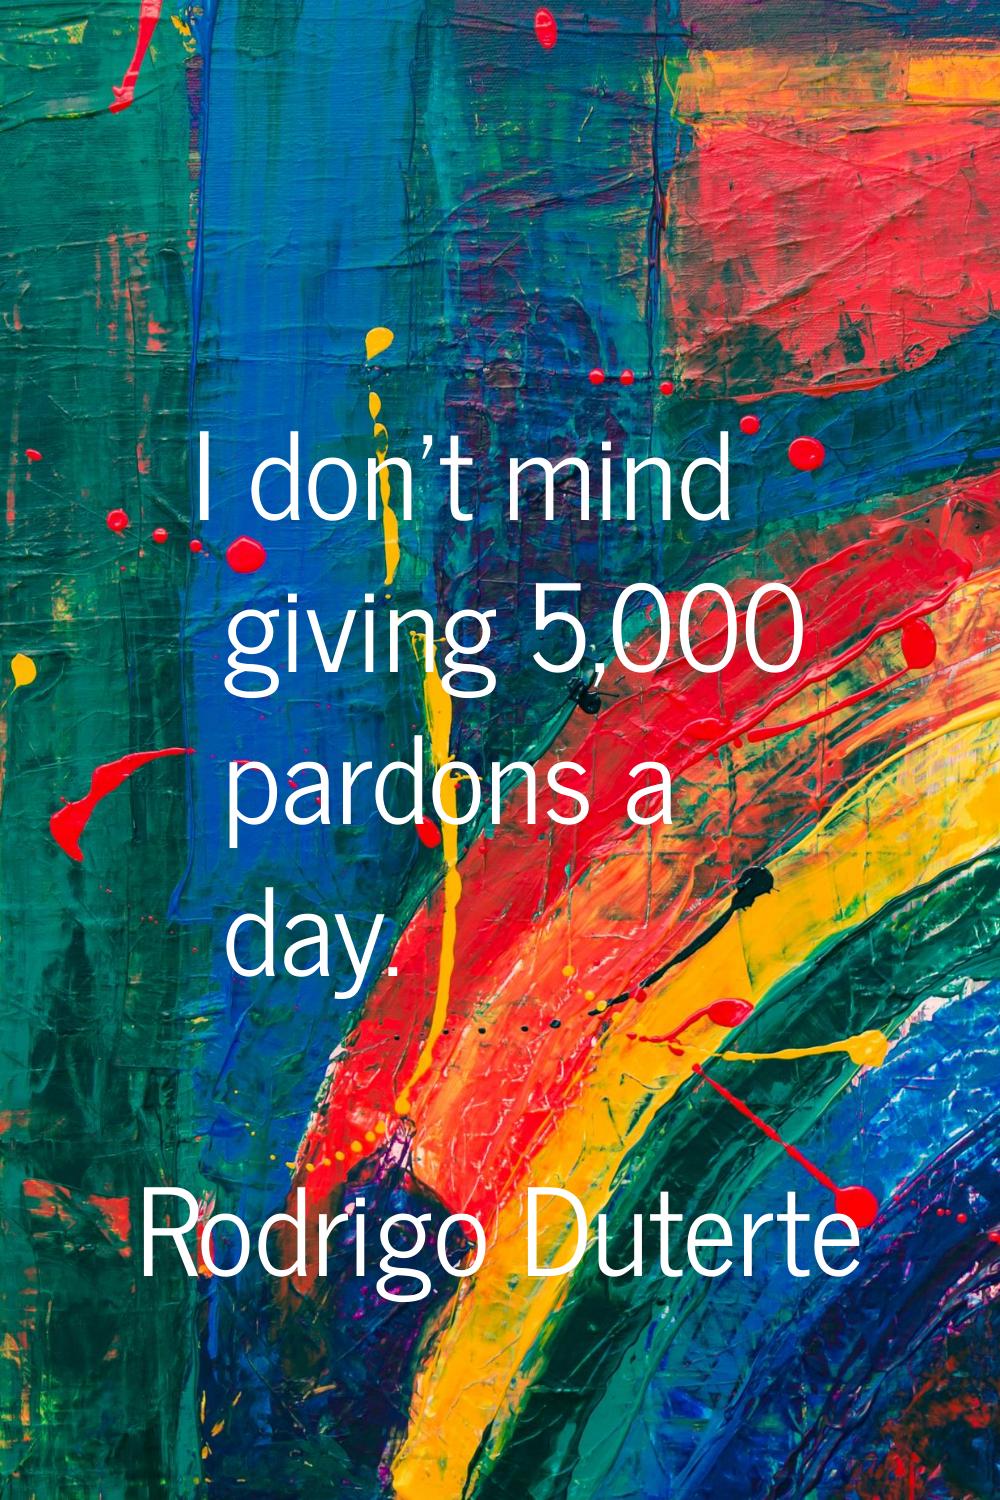 I don't mind giving 5,000 pardons a day.